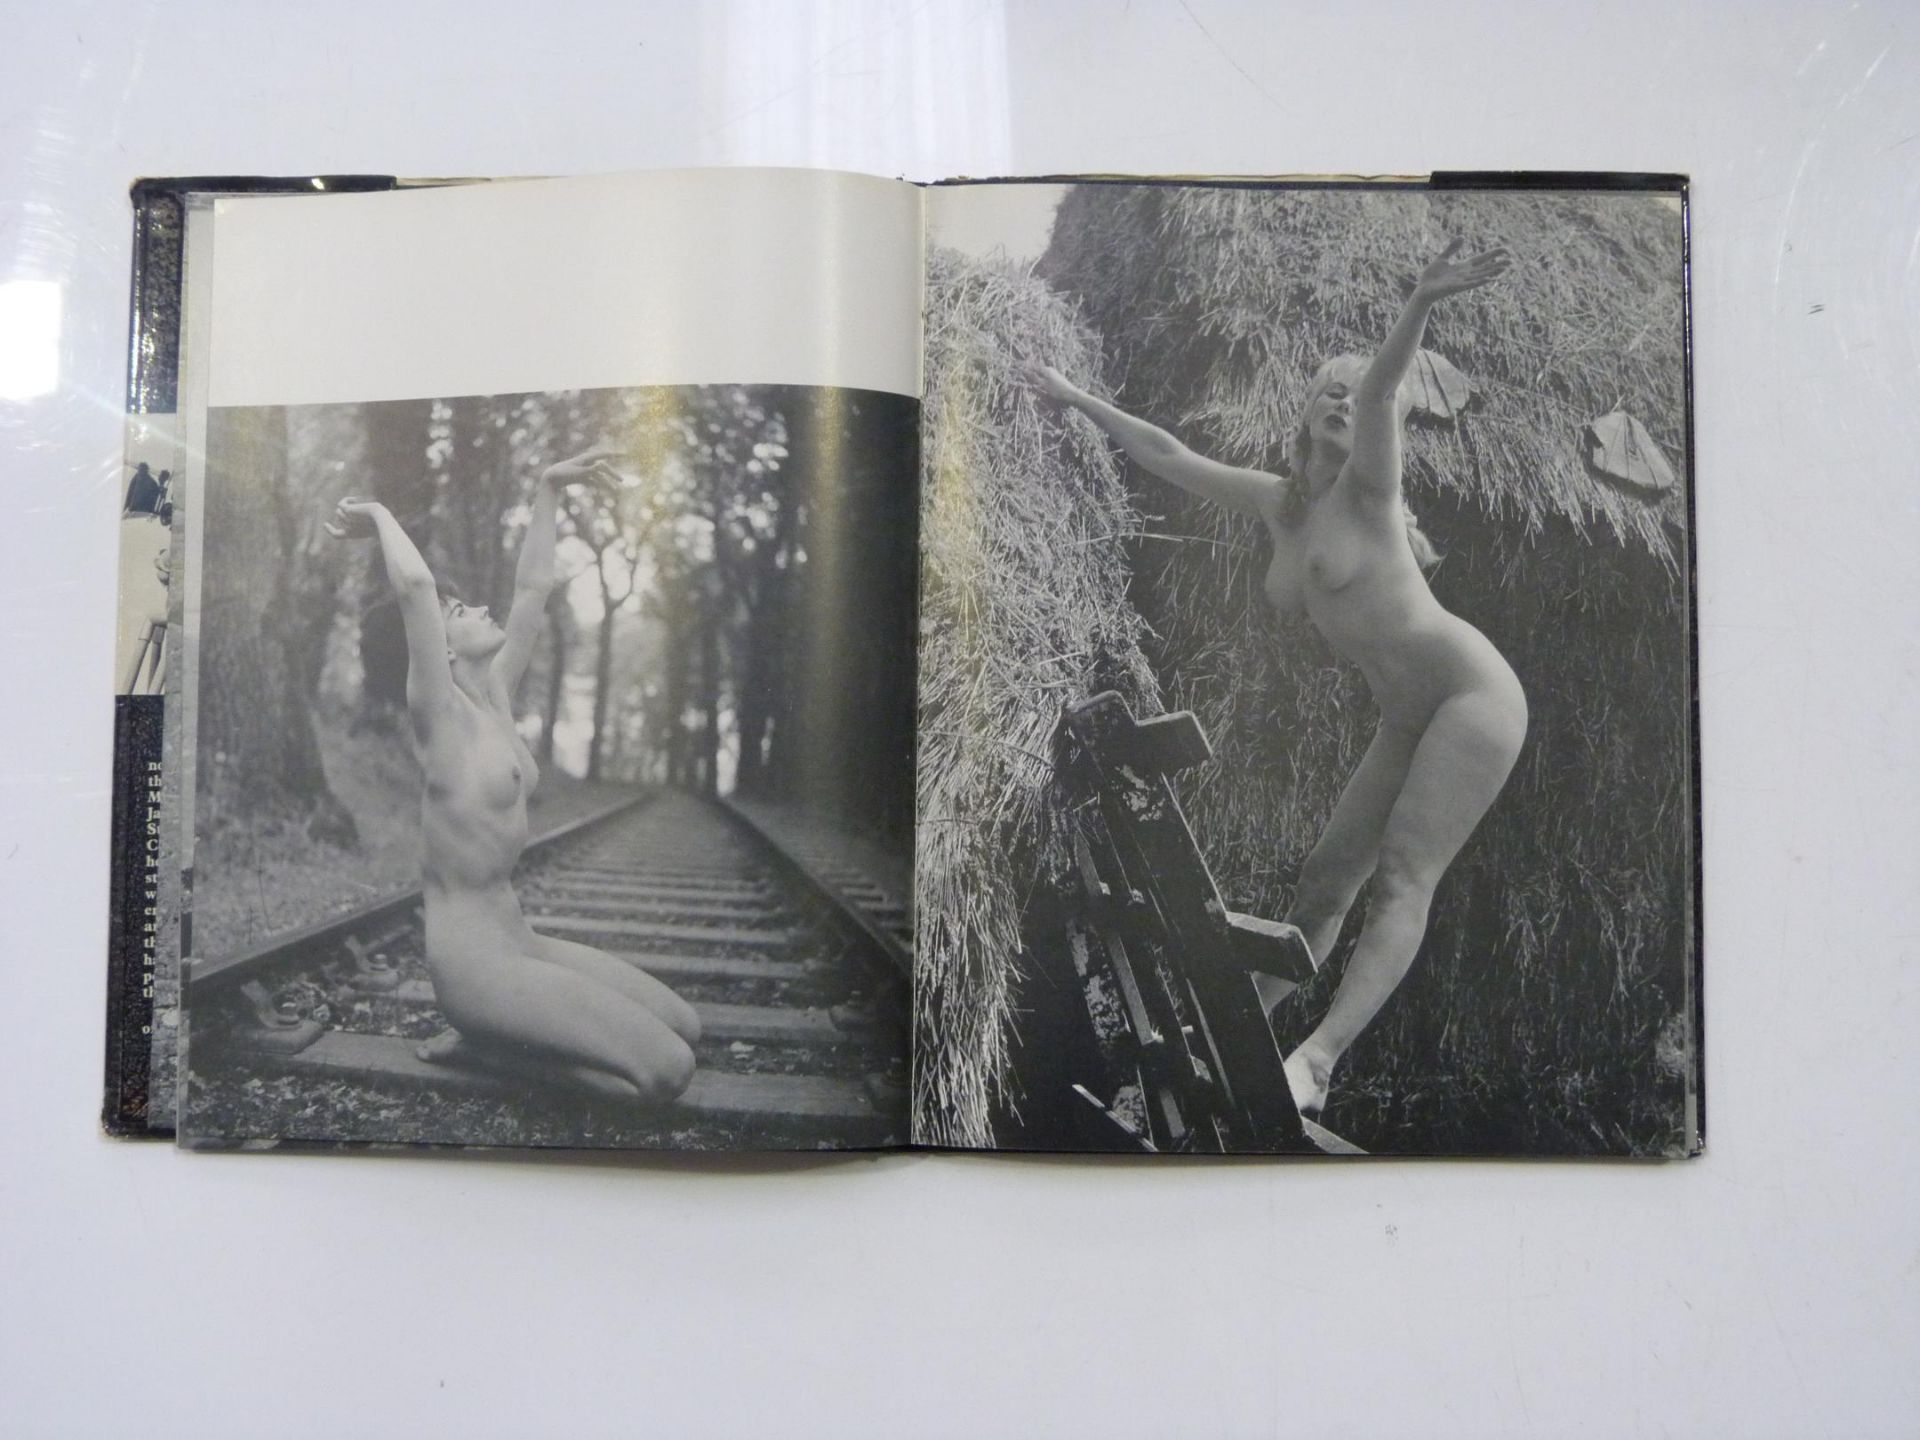 Harrison Marks - 4 various books & 'The Nude' by Andre De Dienes 1956 (est. £30-£50) - Image 3 of 14